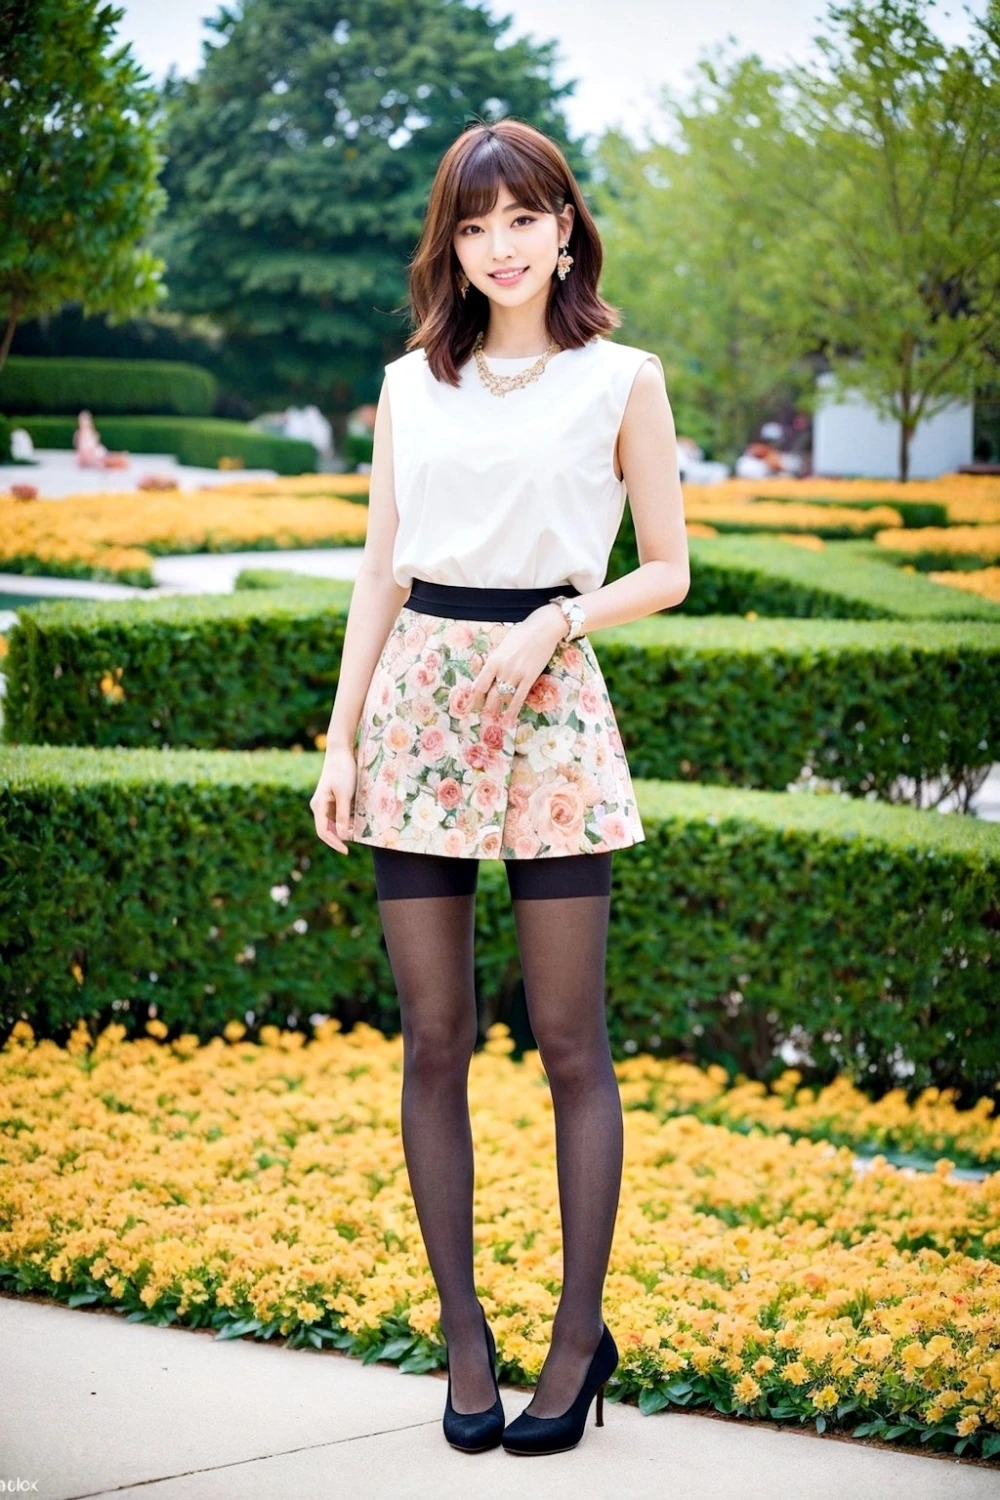 skirt-realistic-style-all-ages-26